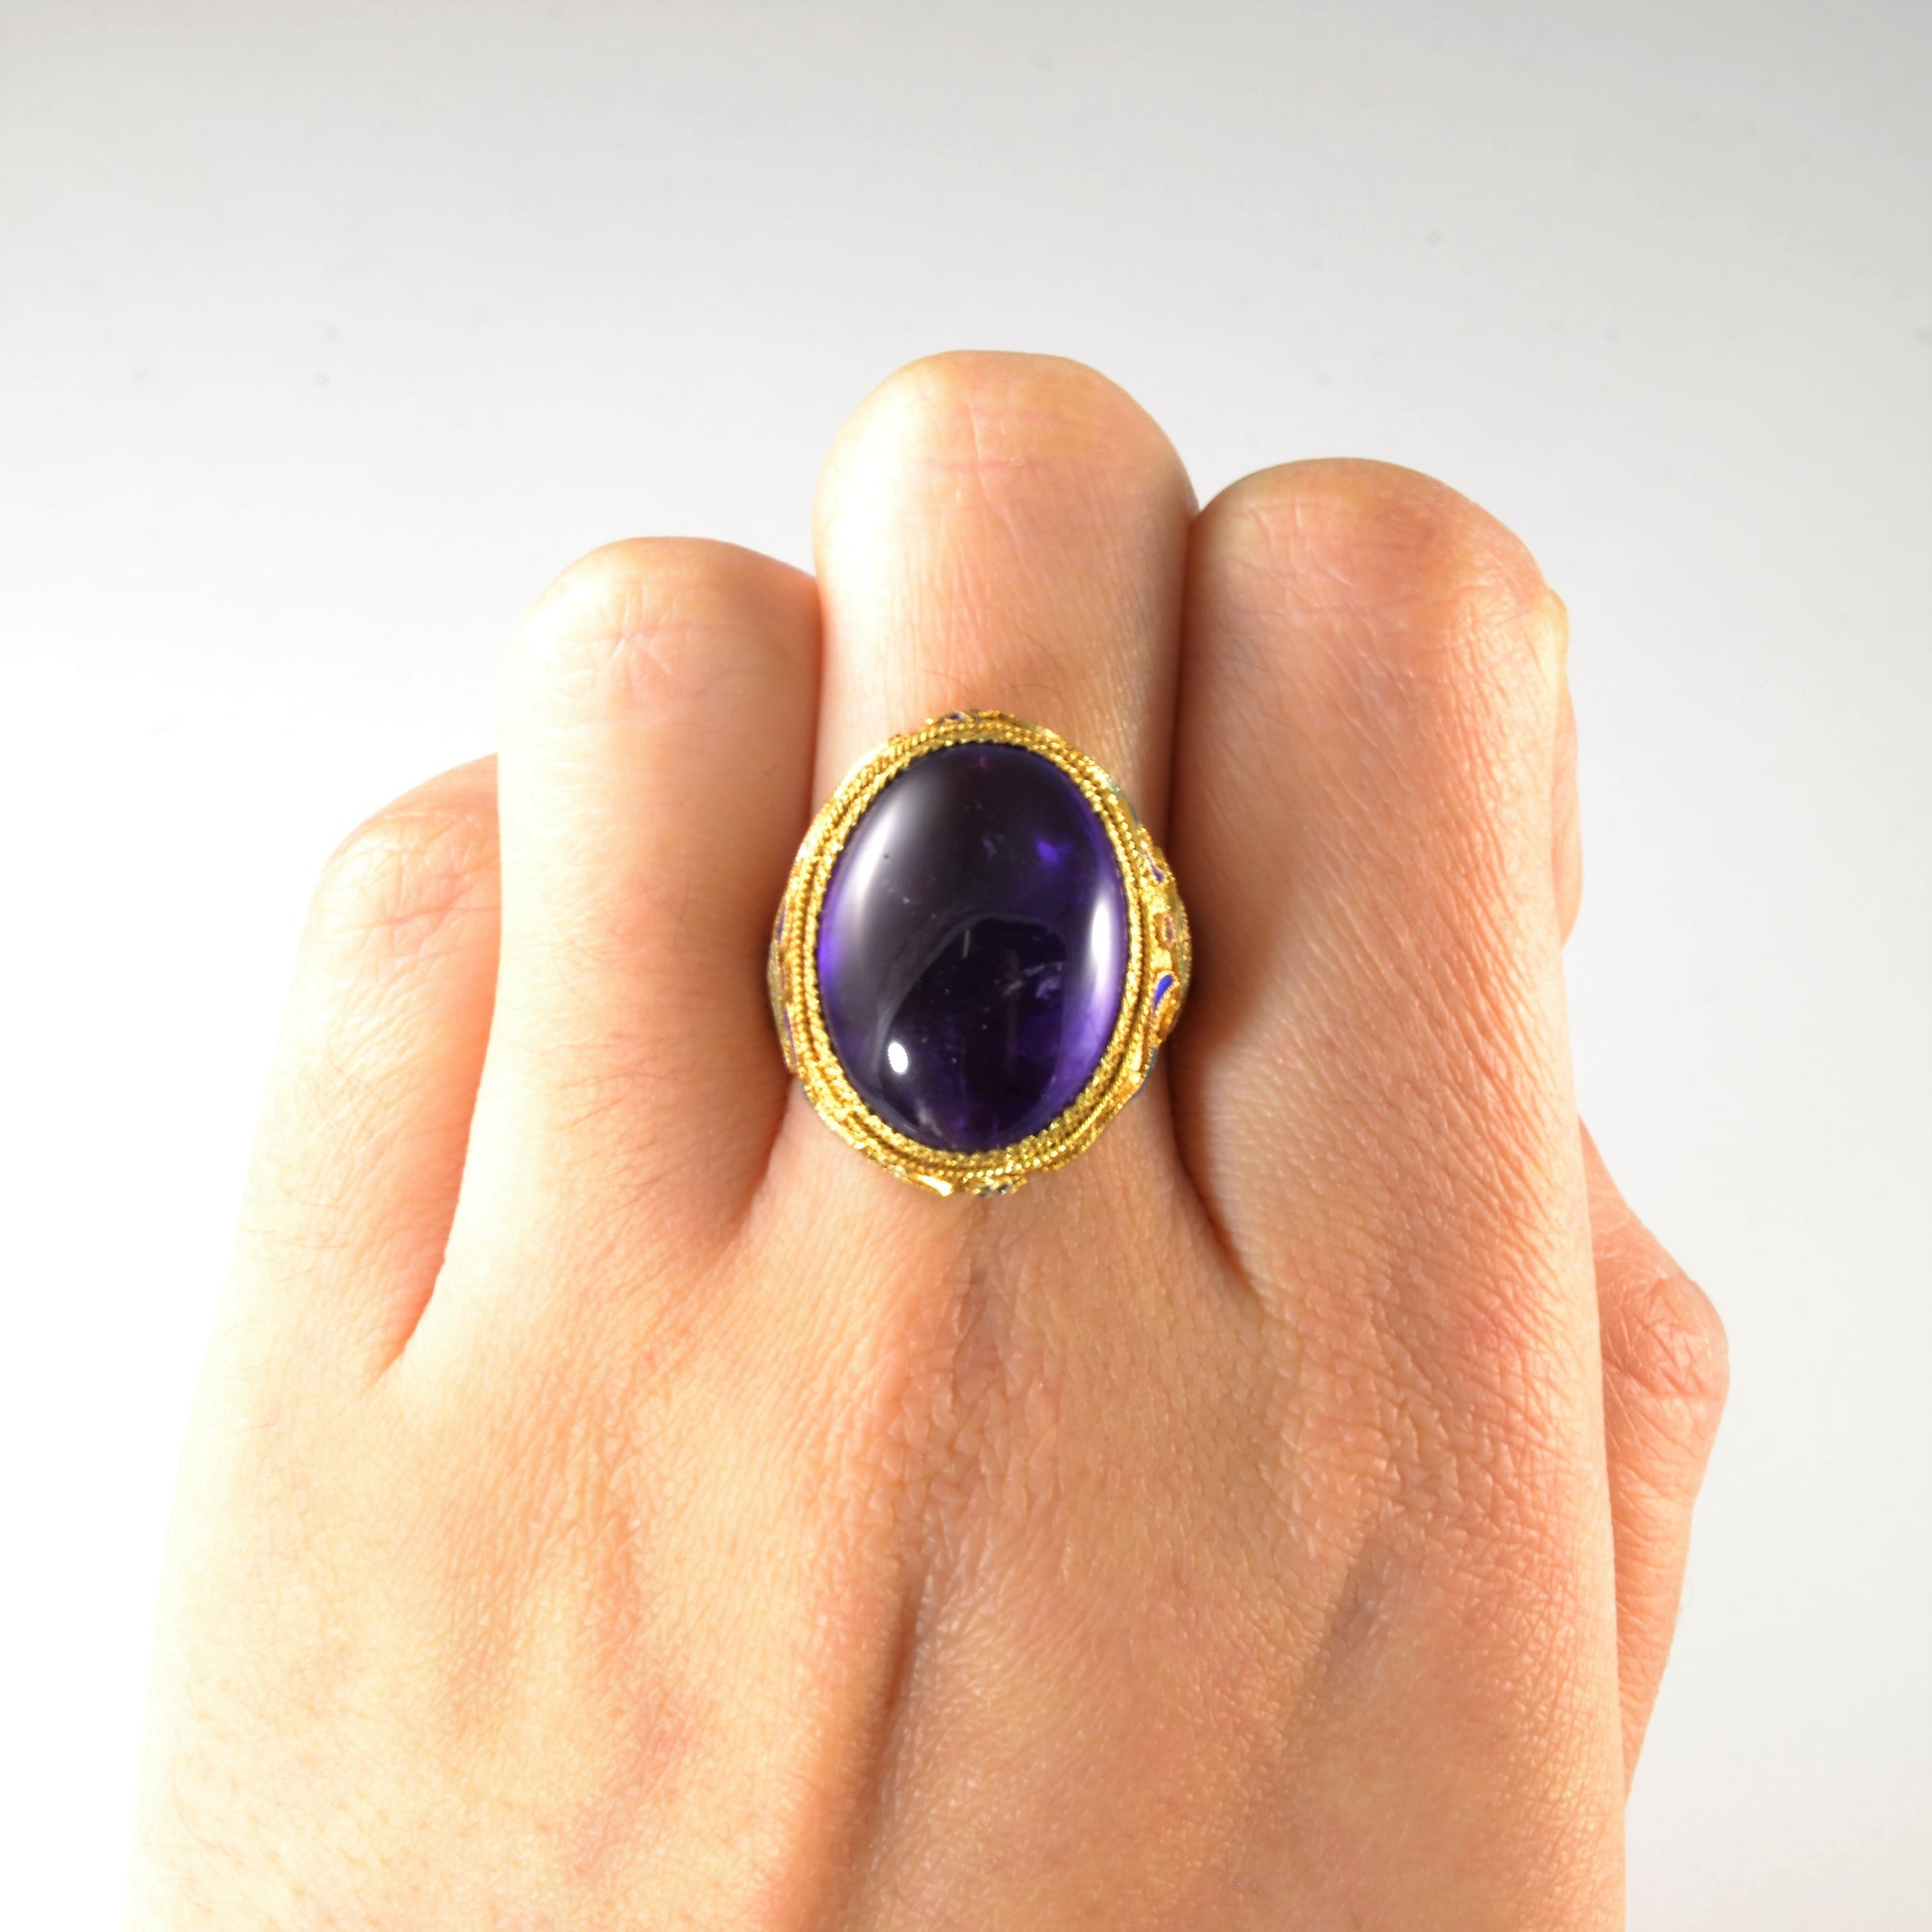 Enameled Amethyst Cocktail Ring | 14.00ct | SZ 7 |